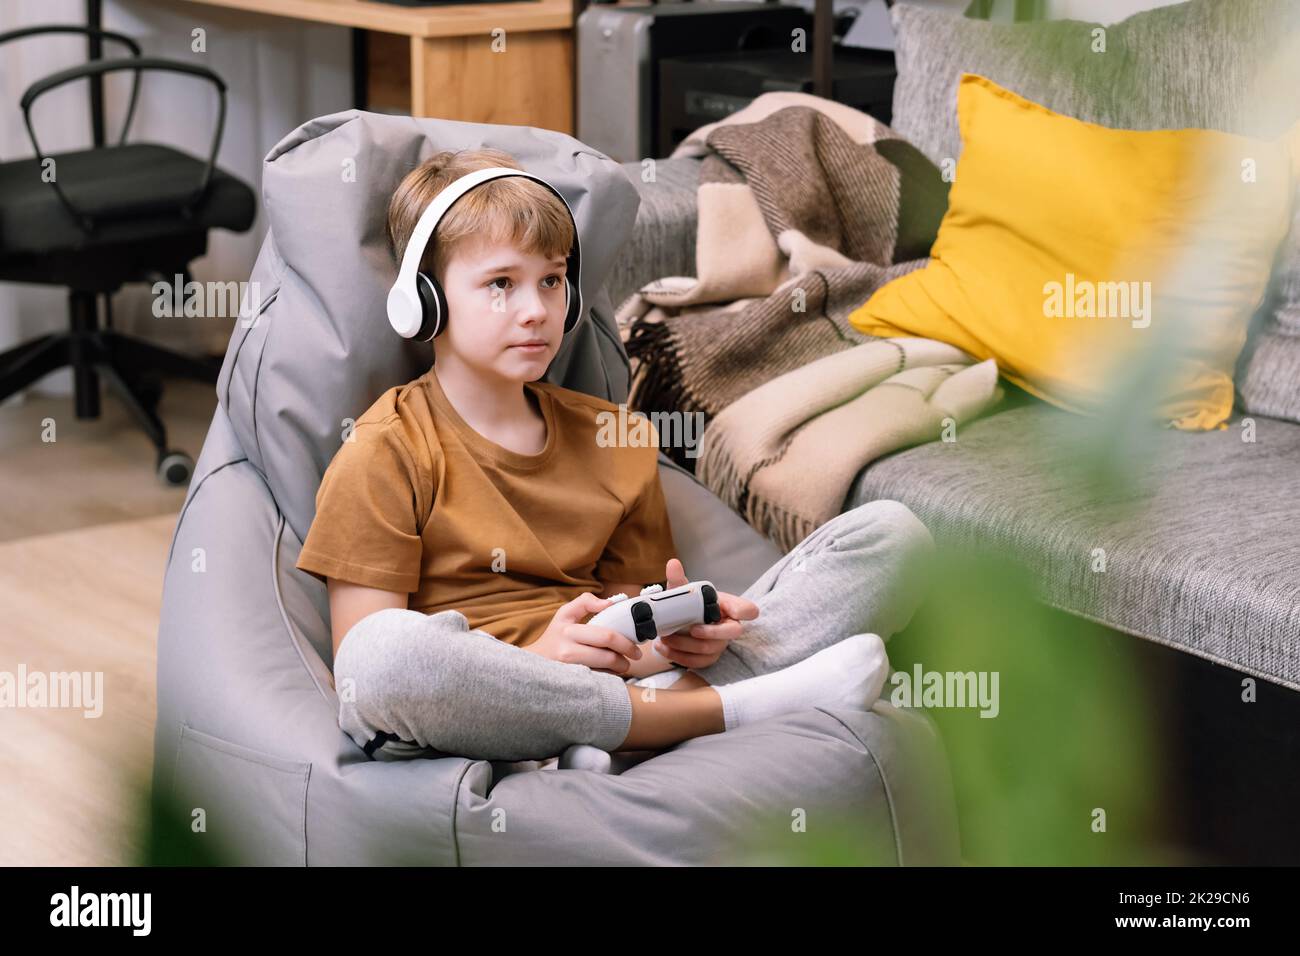 Portrait of teen boy actively and recklessly playing video game with joystick Stock Photo